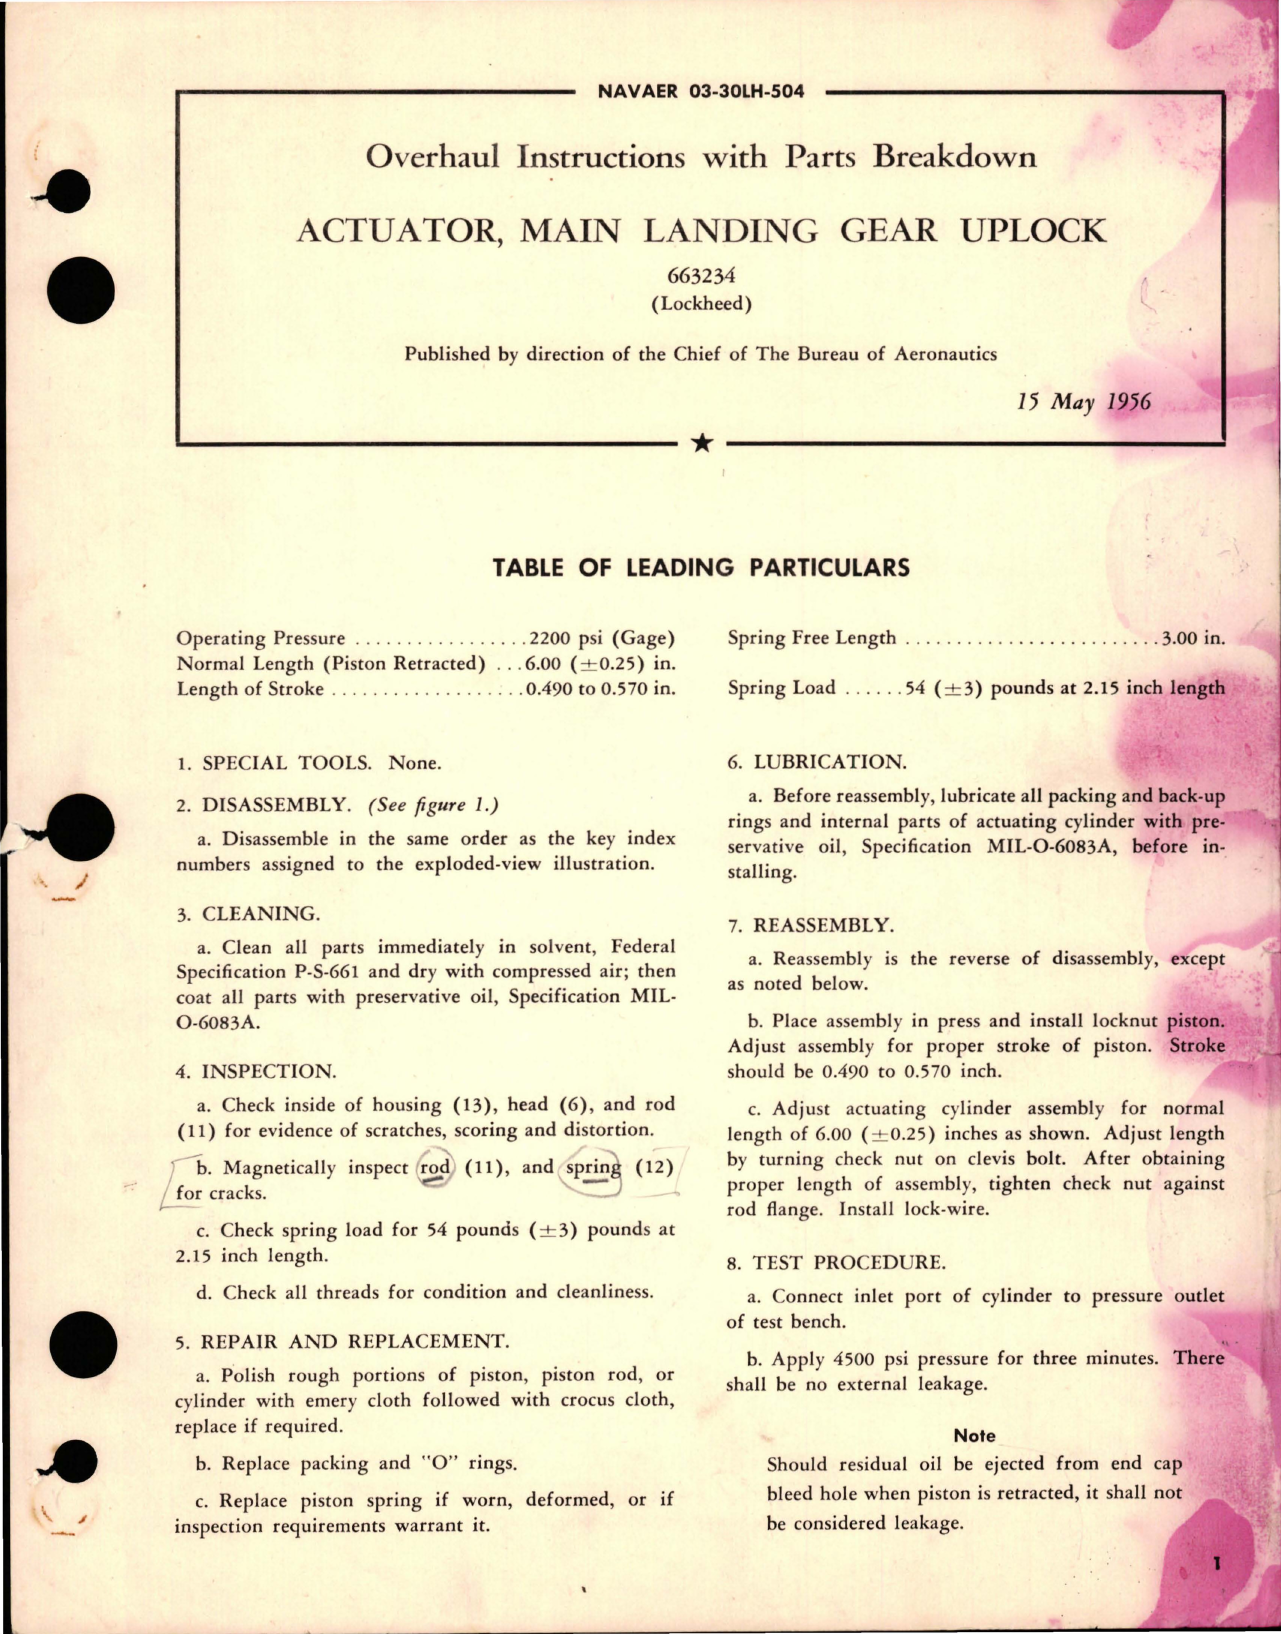 Sample page 1 from AirCorps Library document: Overhaul Instructions with Parts Breakdown for Main Landing Gear Uplock Actuator - 663234